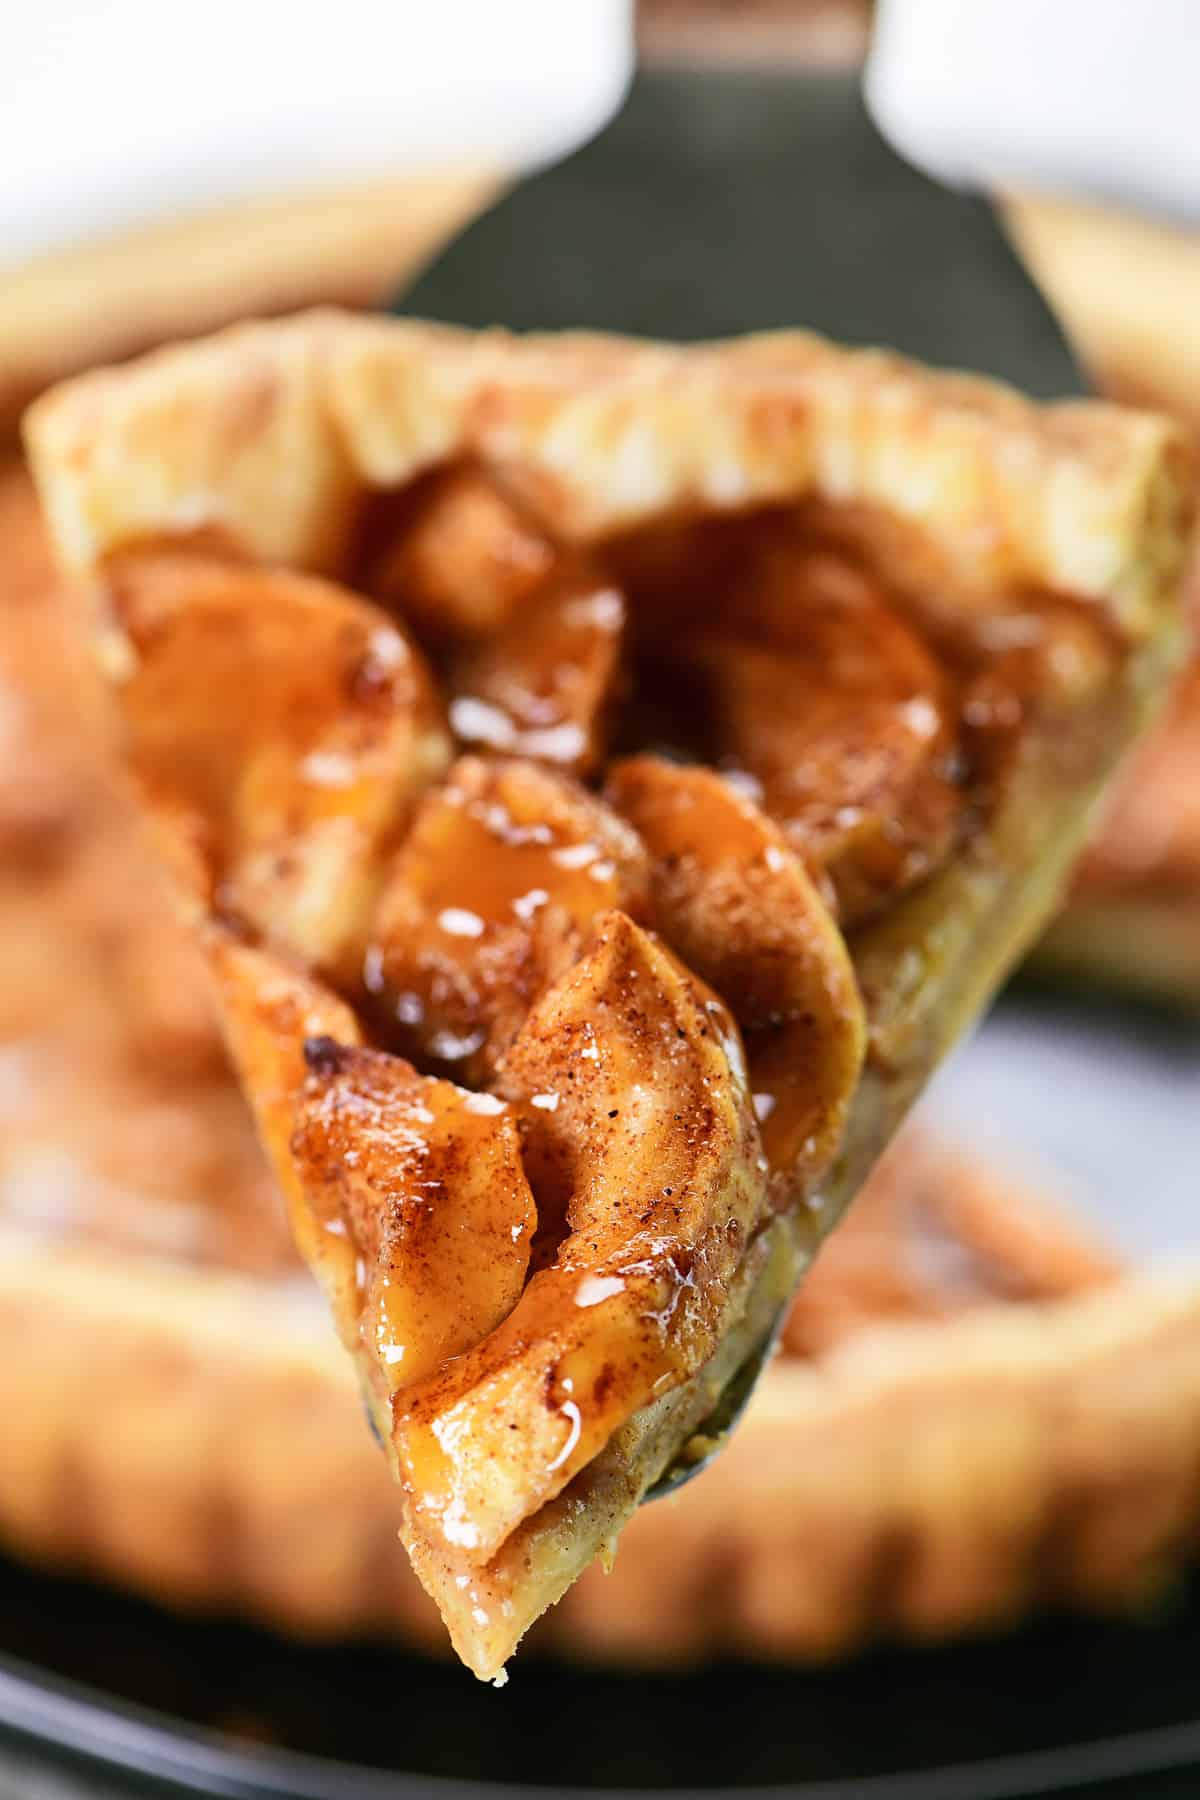 A slice of puff pastry apple tart.